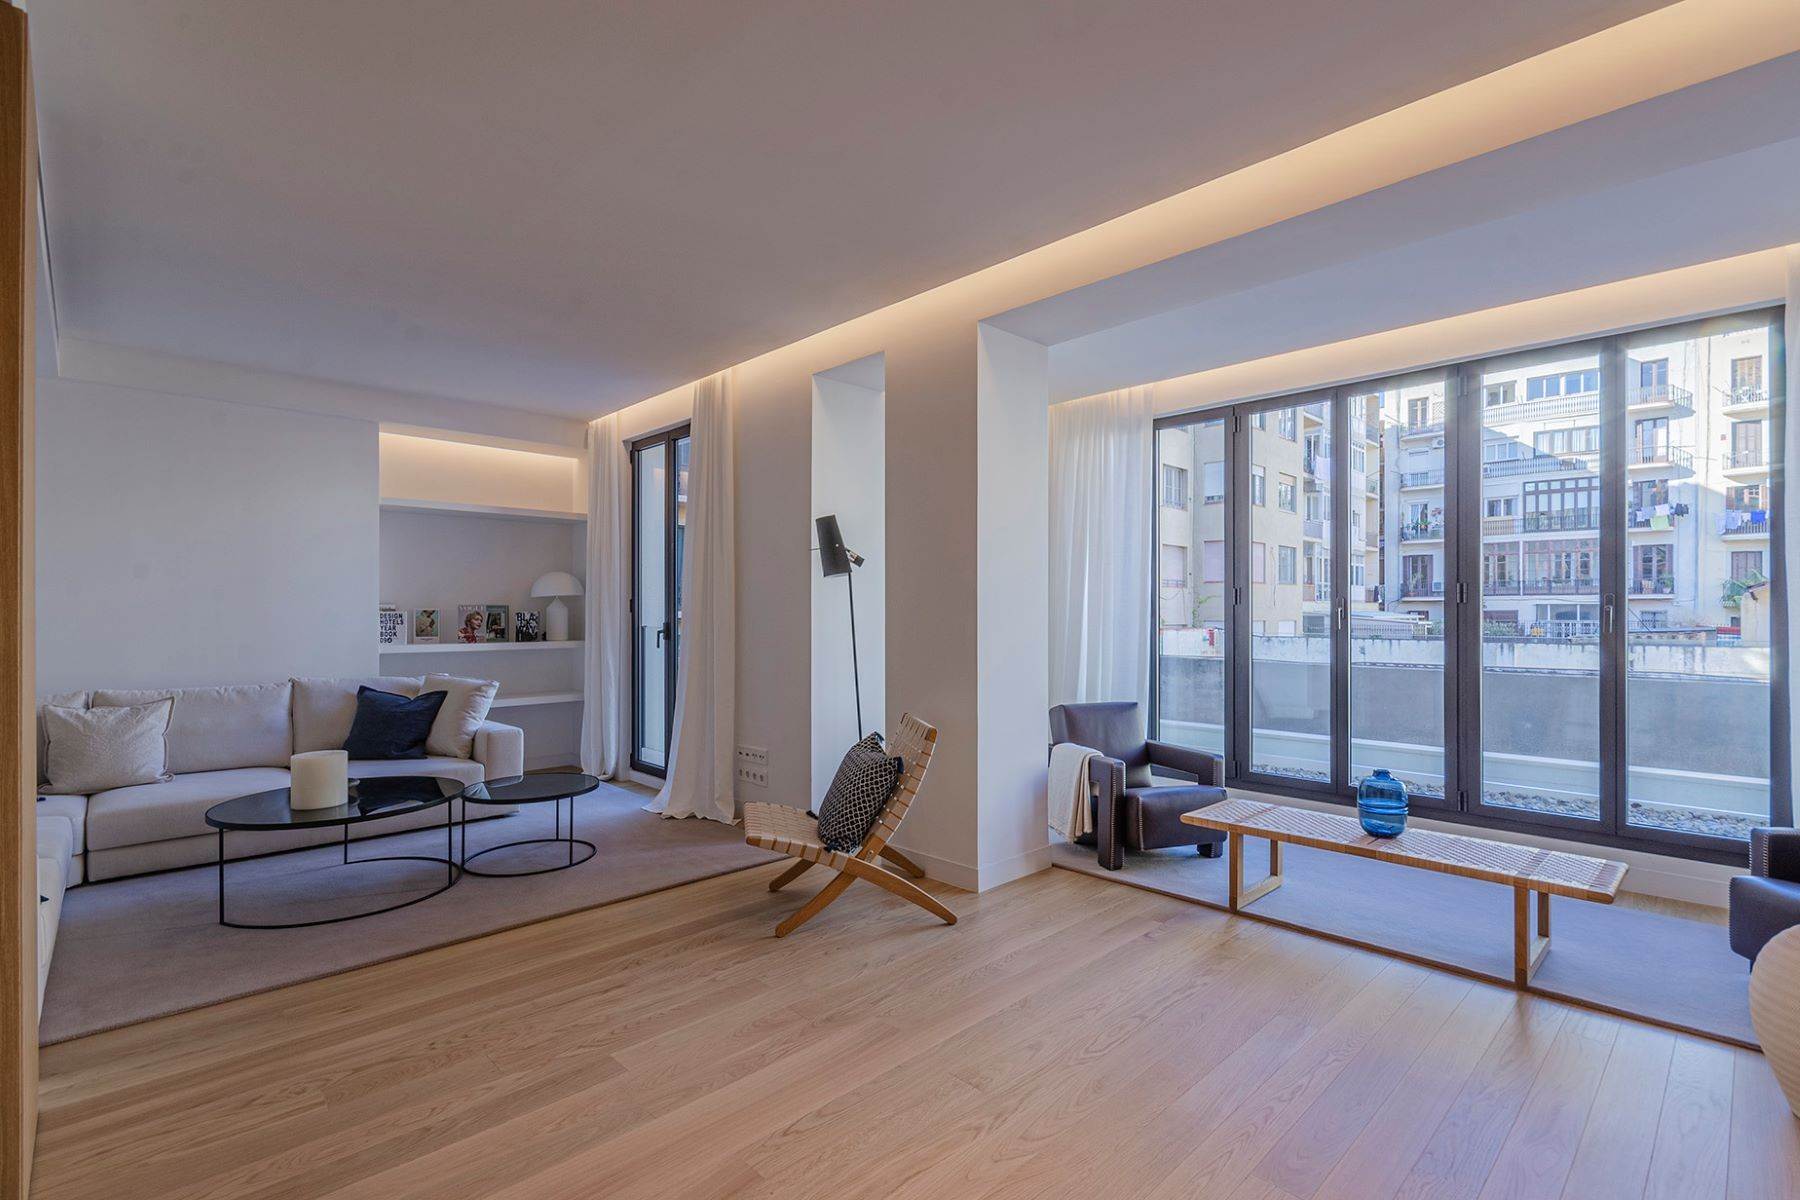 Apartments for Sale at Comfortable interior apartment in the exclusive Eixample district Barcelona, Barcelona 08013 Spain